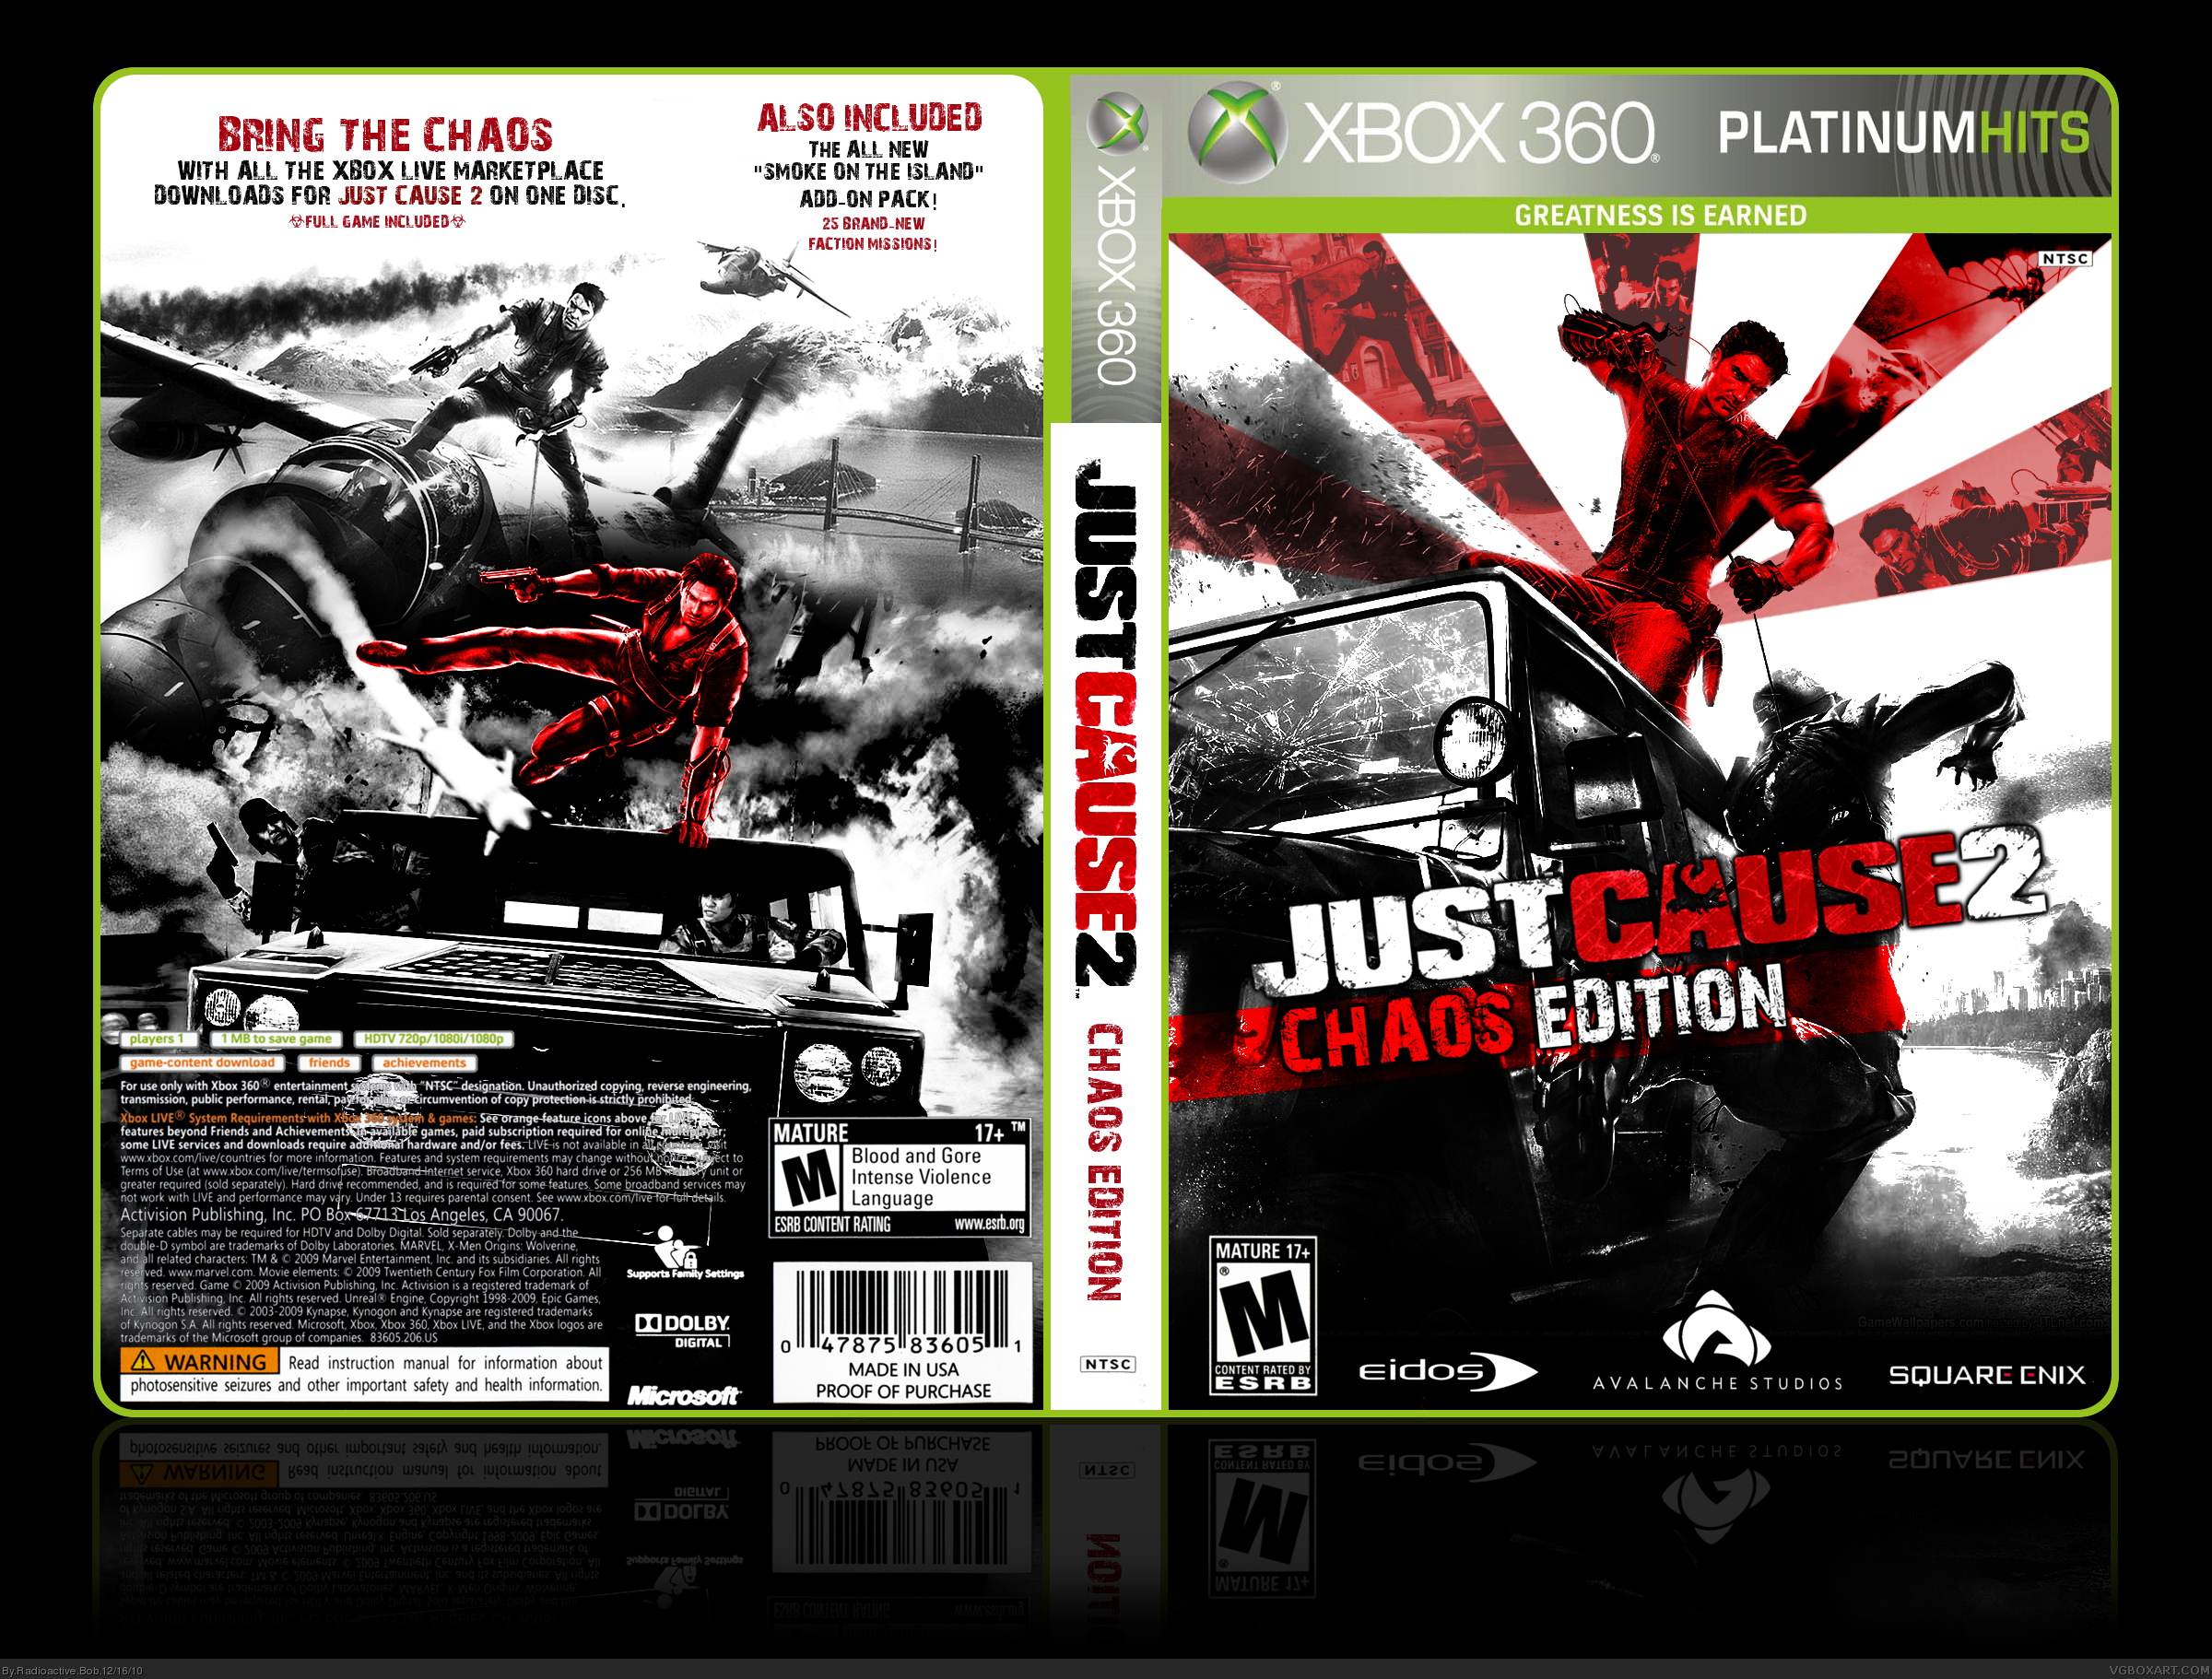 Just Cause 2: Chaos Edition box cover